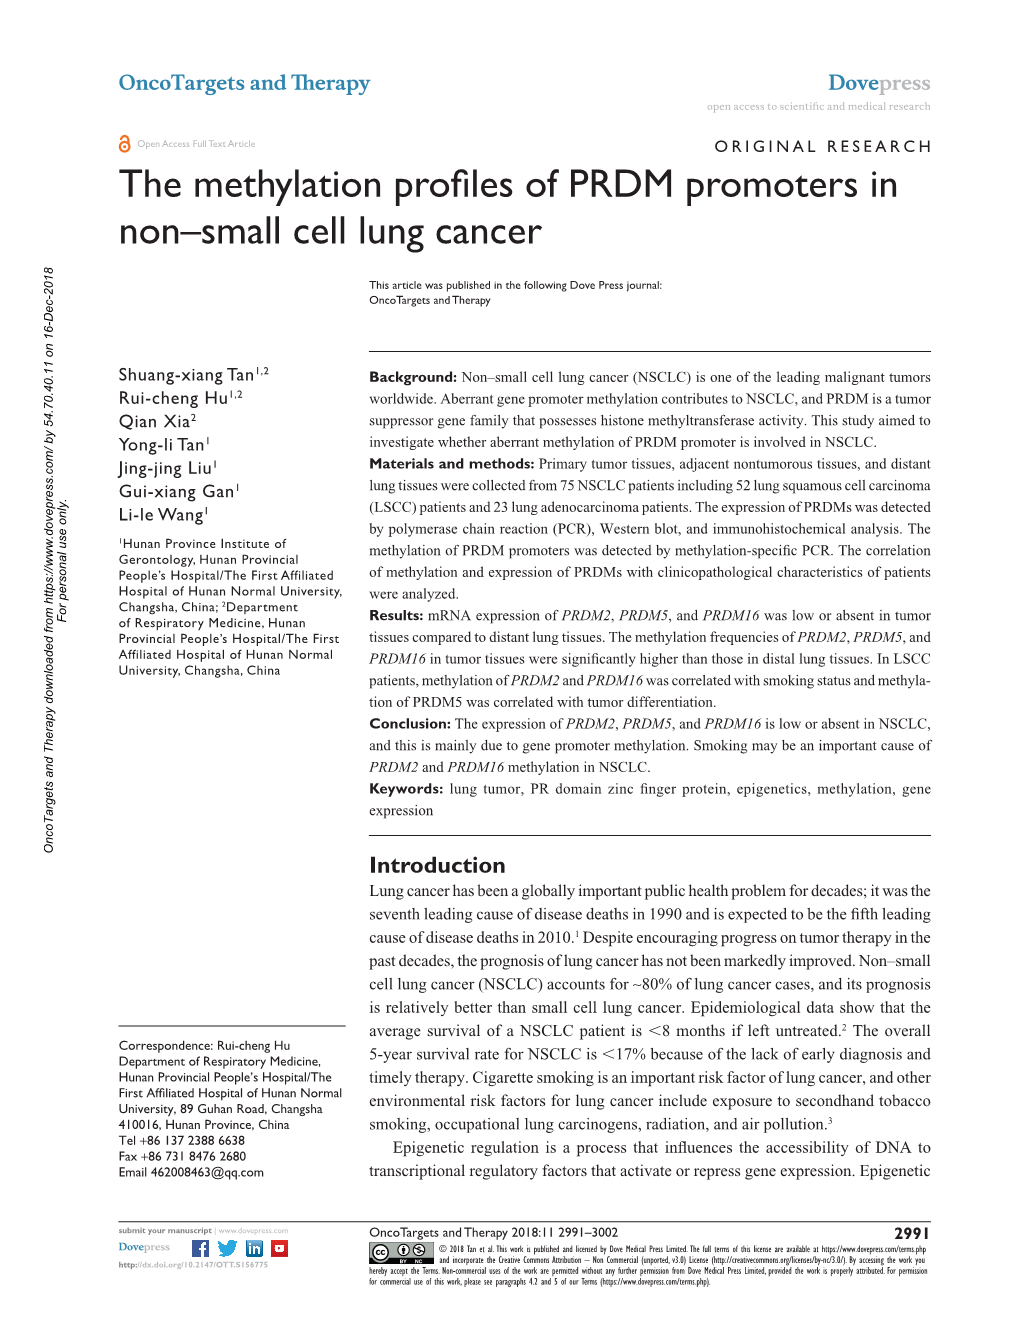 The Methylation Profiles of PRDM Promoters in Non–Small Cell Lung Cancer